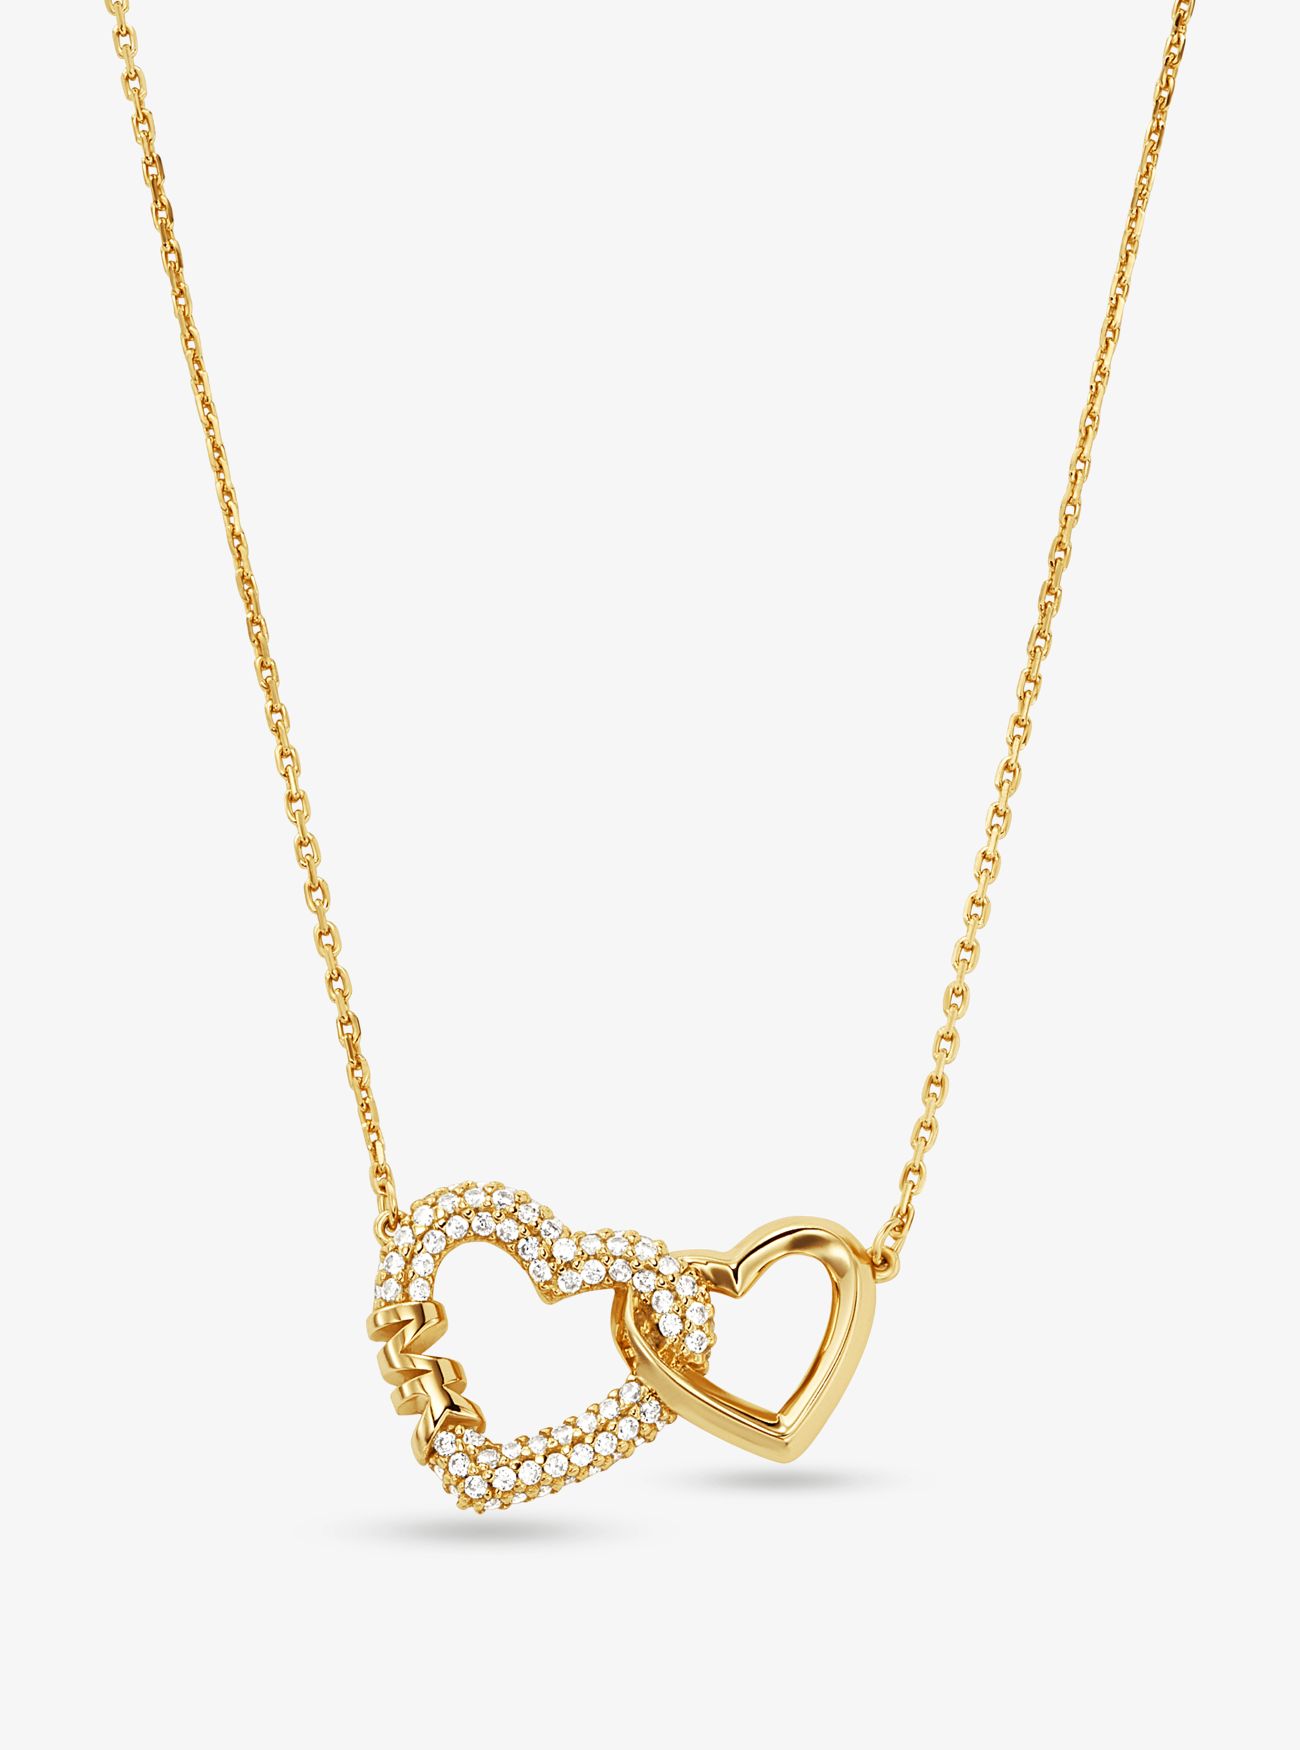 MK Precious Metal-Plated Sterling Silver Interlocking Hearts Necklace - Gold - Michael Kors